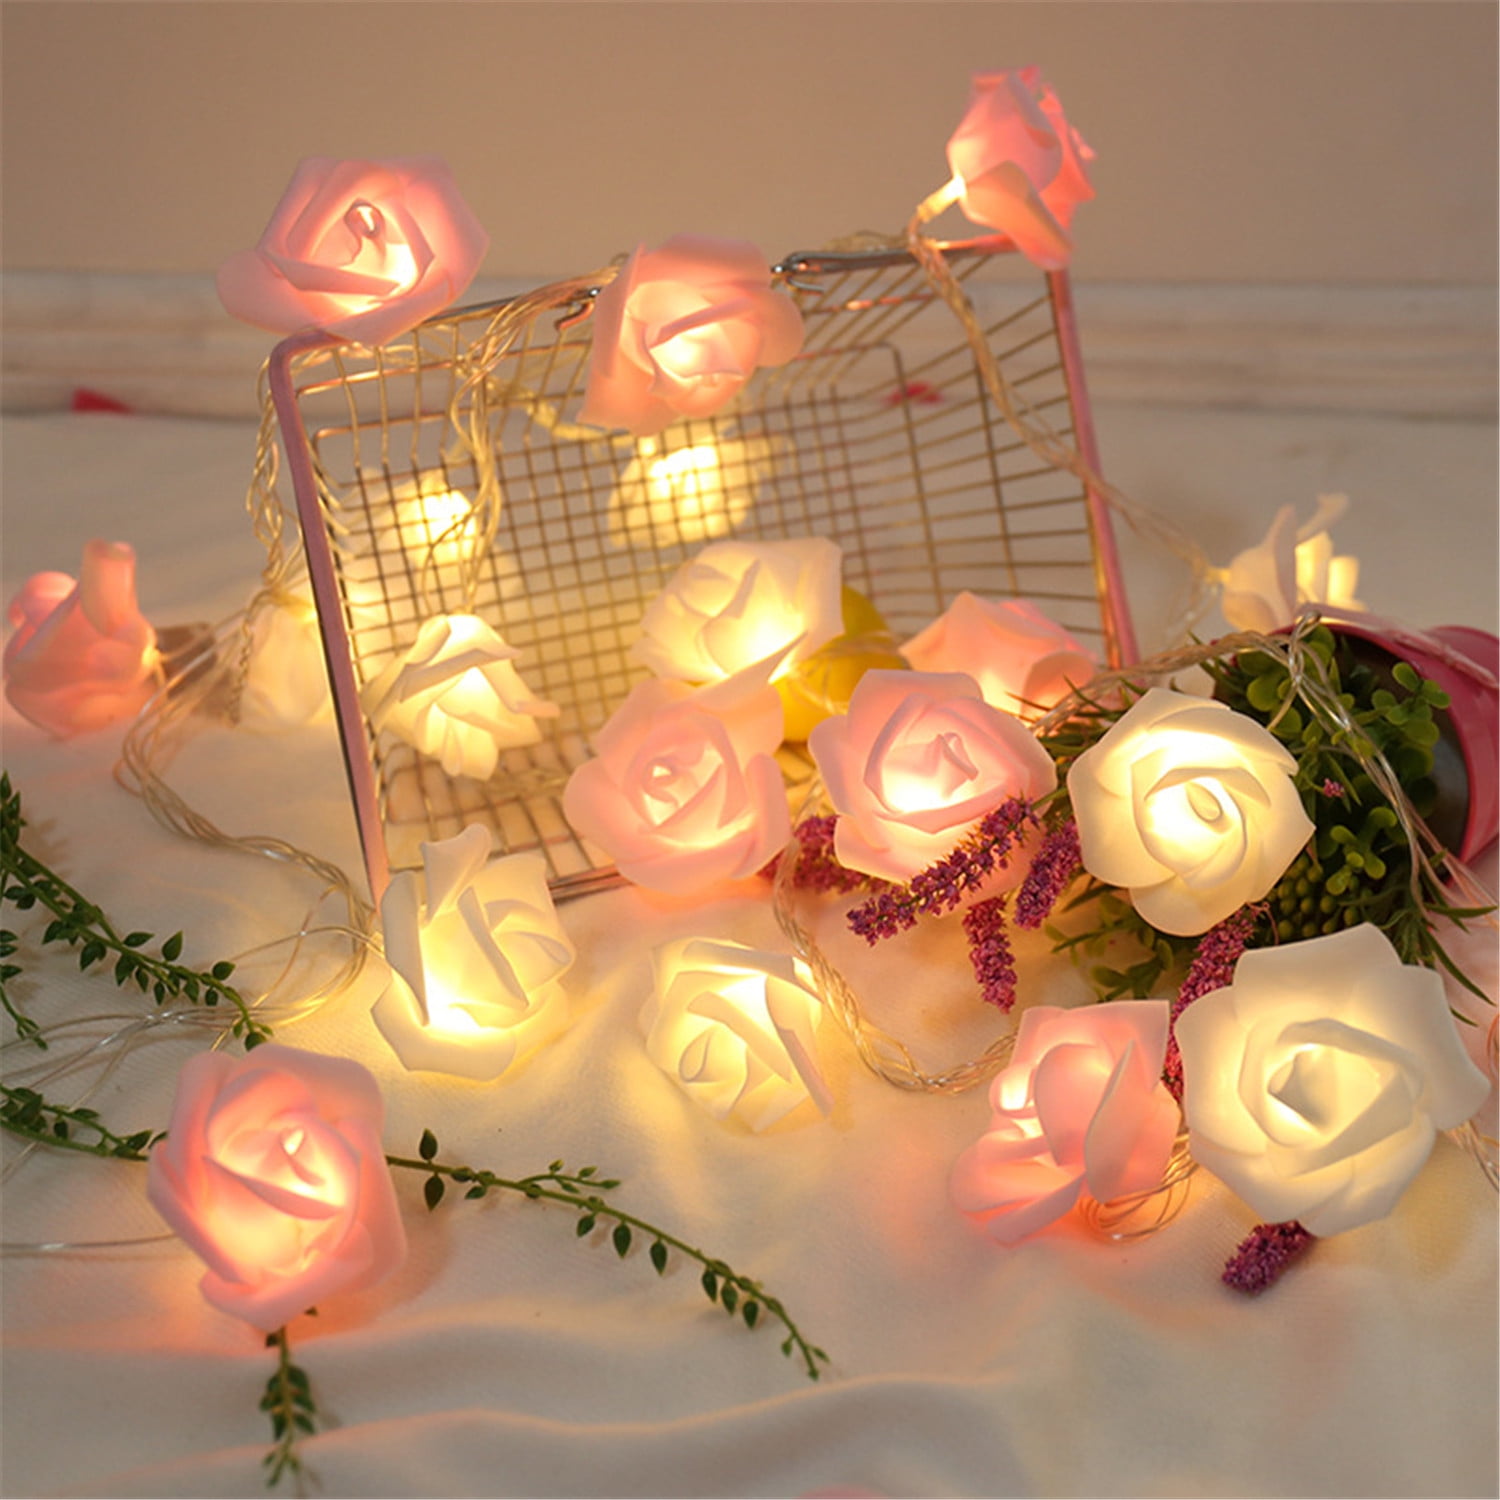 Details about   Rose Flower Led Fairy String Lights Battery Powered Wedding Valentine Day Event 